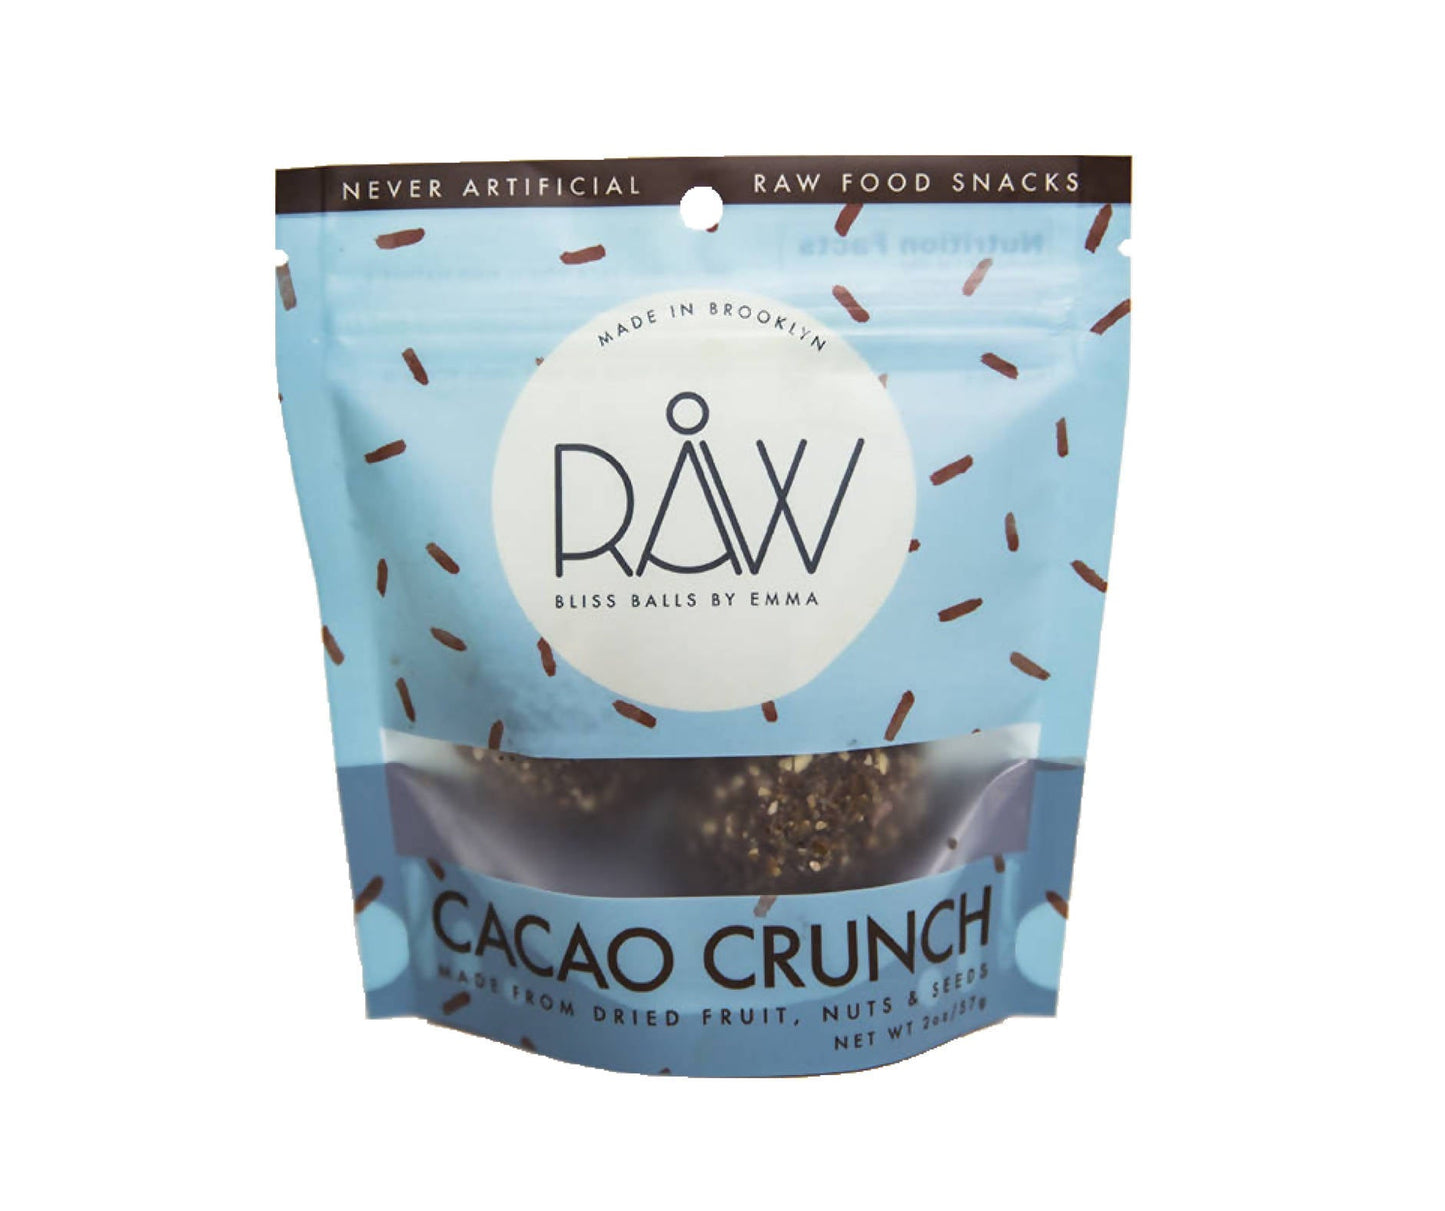 Cacao Crunch RAW Bliss Balls Bags - 20 Pack